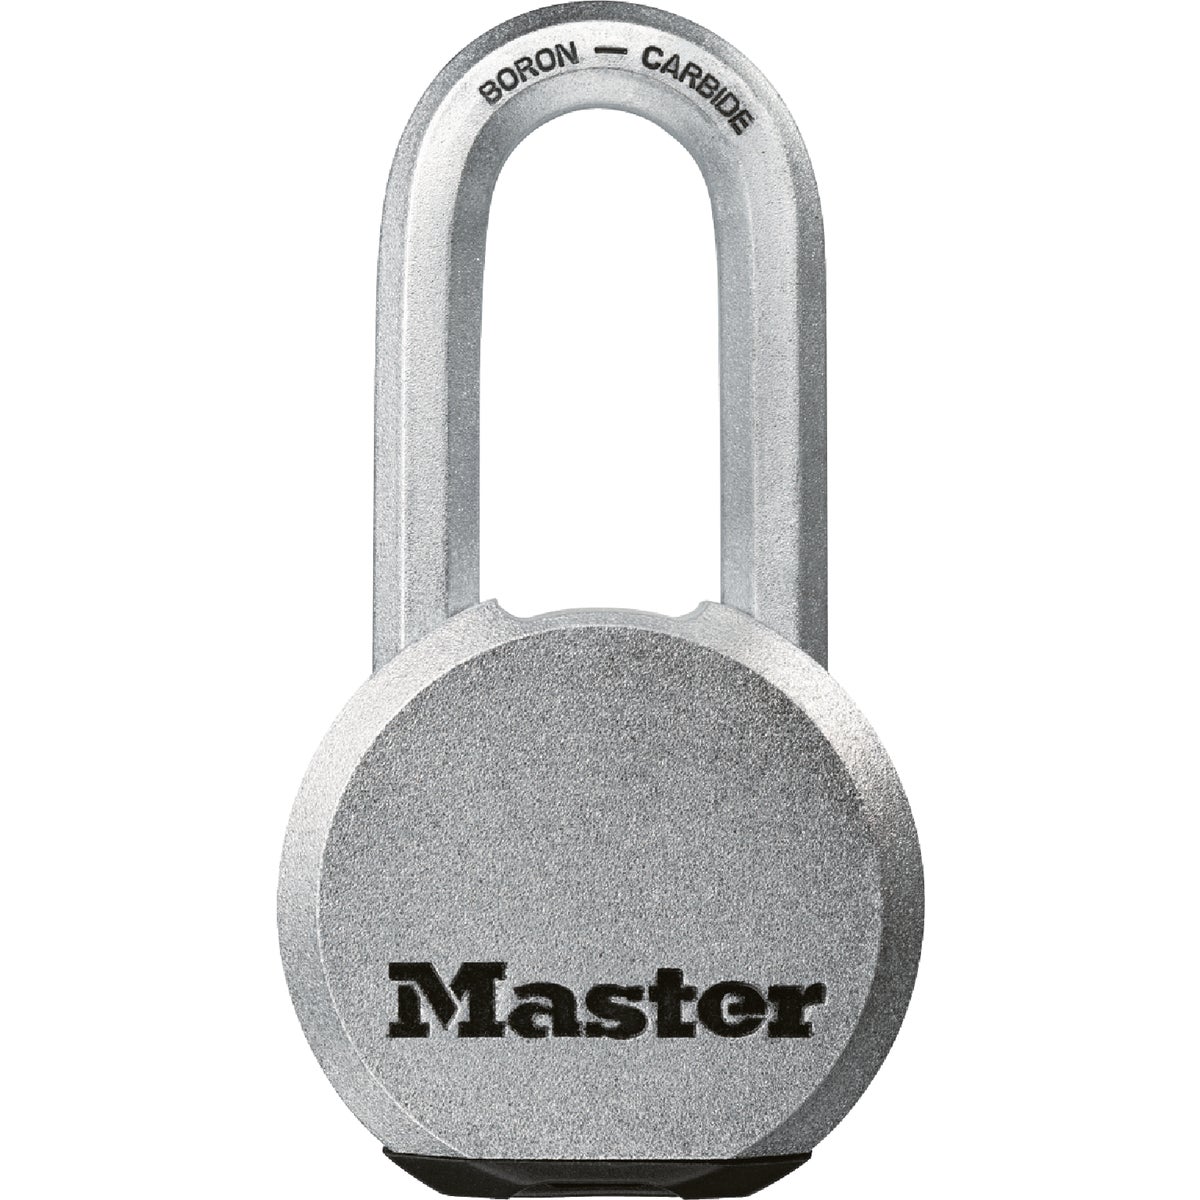 Item 224472, Solid Body Padlock features a 2-1/2 In.